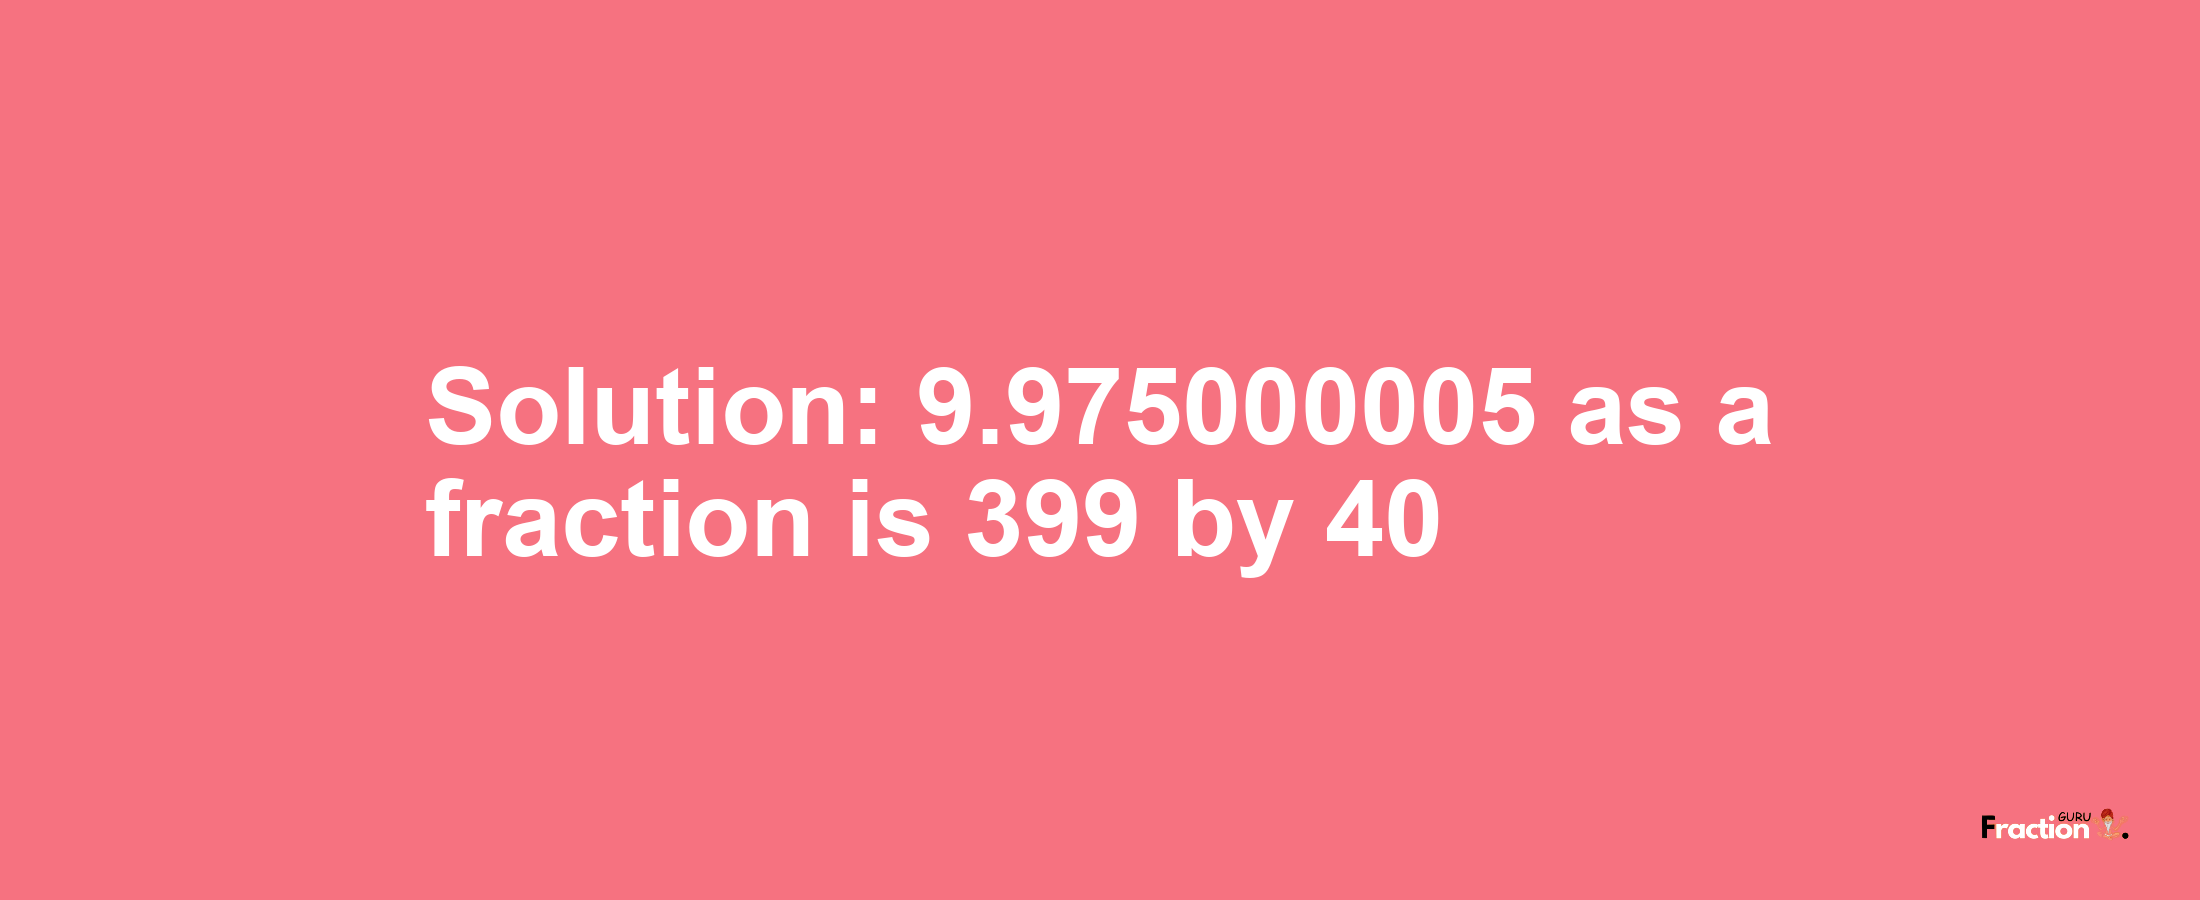 Solution:9.975000005 as a fraction is 399/40